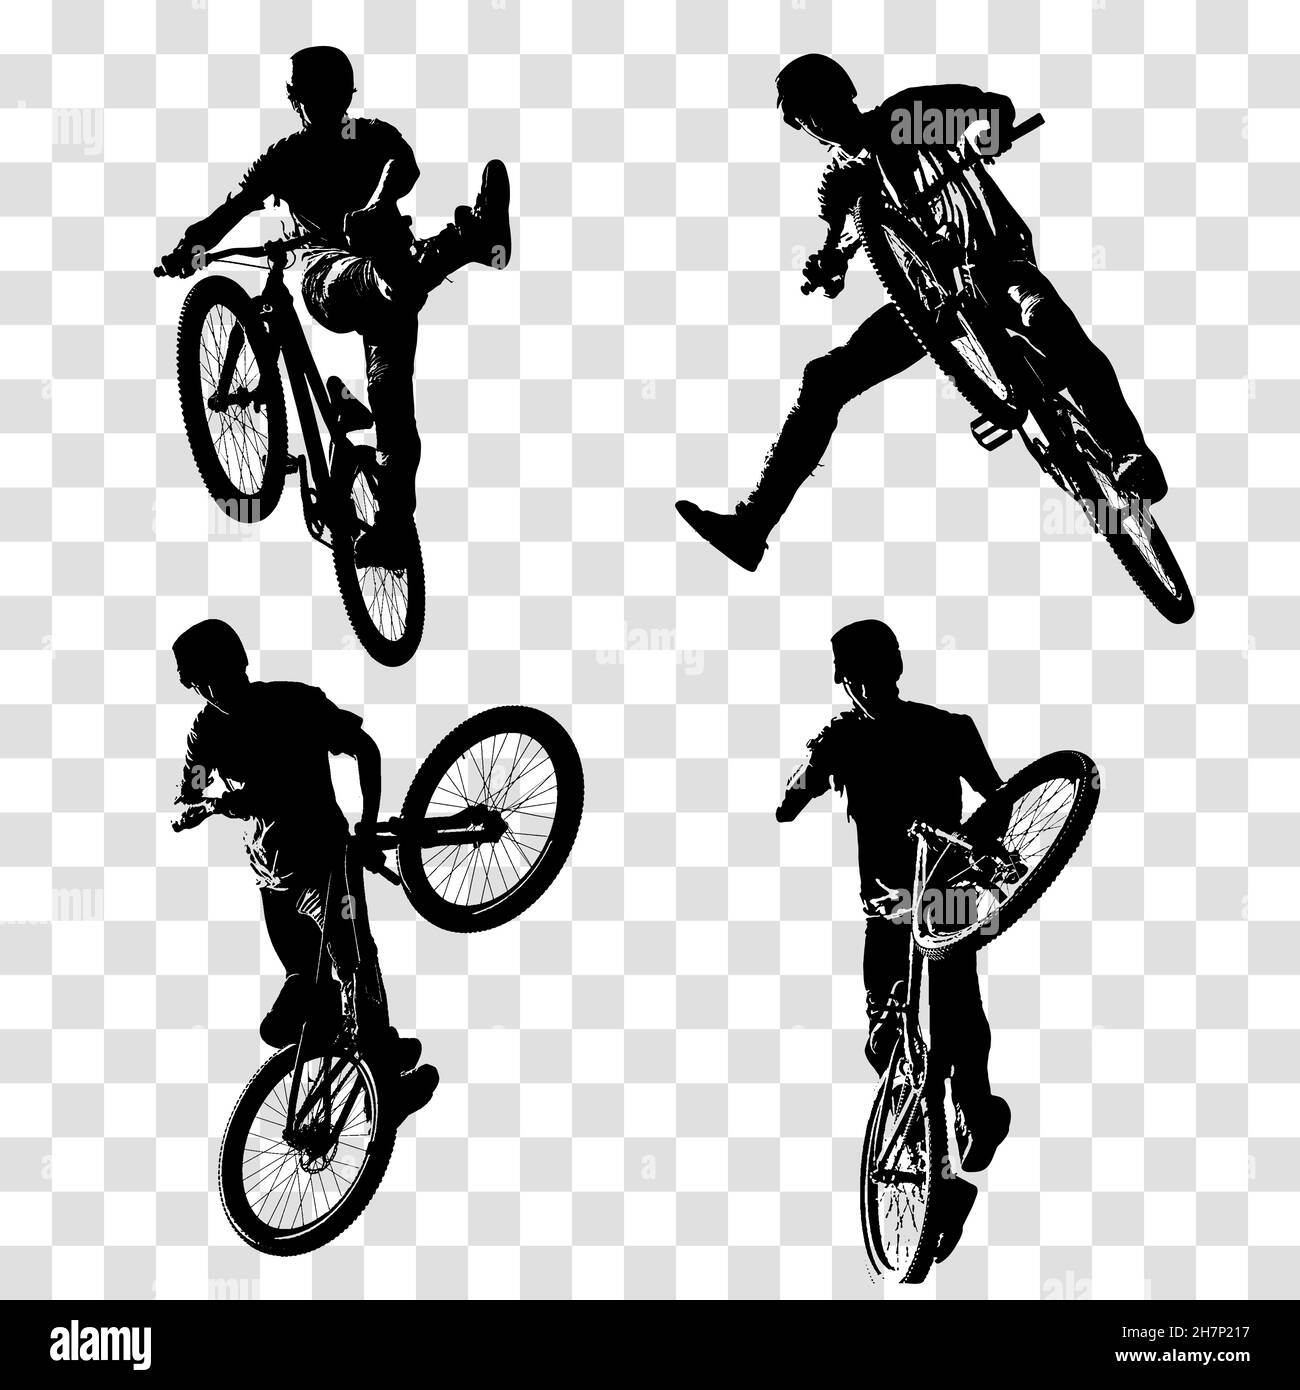 Dirt jumping illustration. Trick biker silhouette isolated on transparent background. Cyclist jump and doing trick on bicycle. Stock Vector